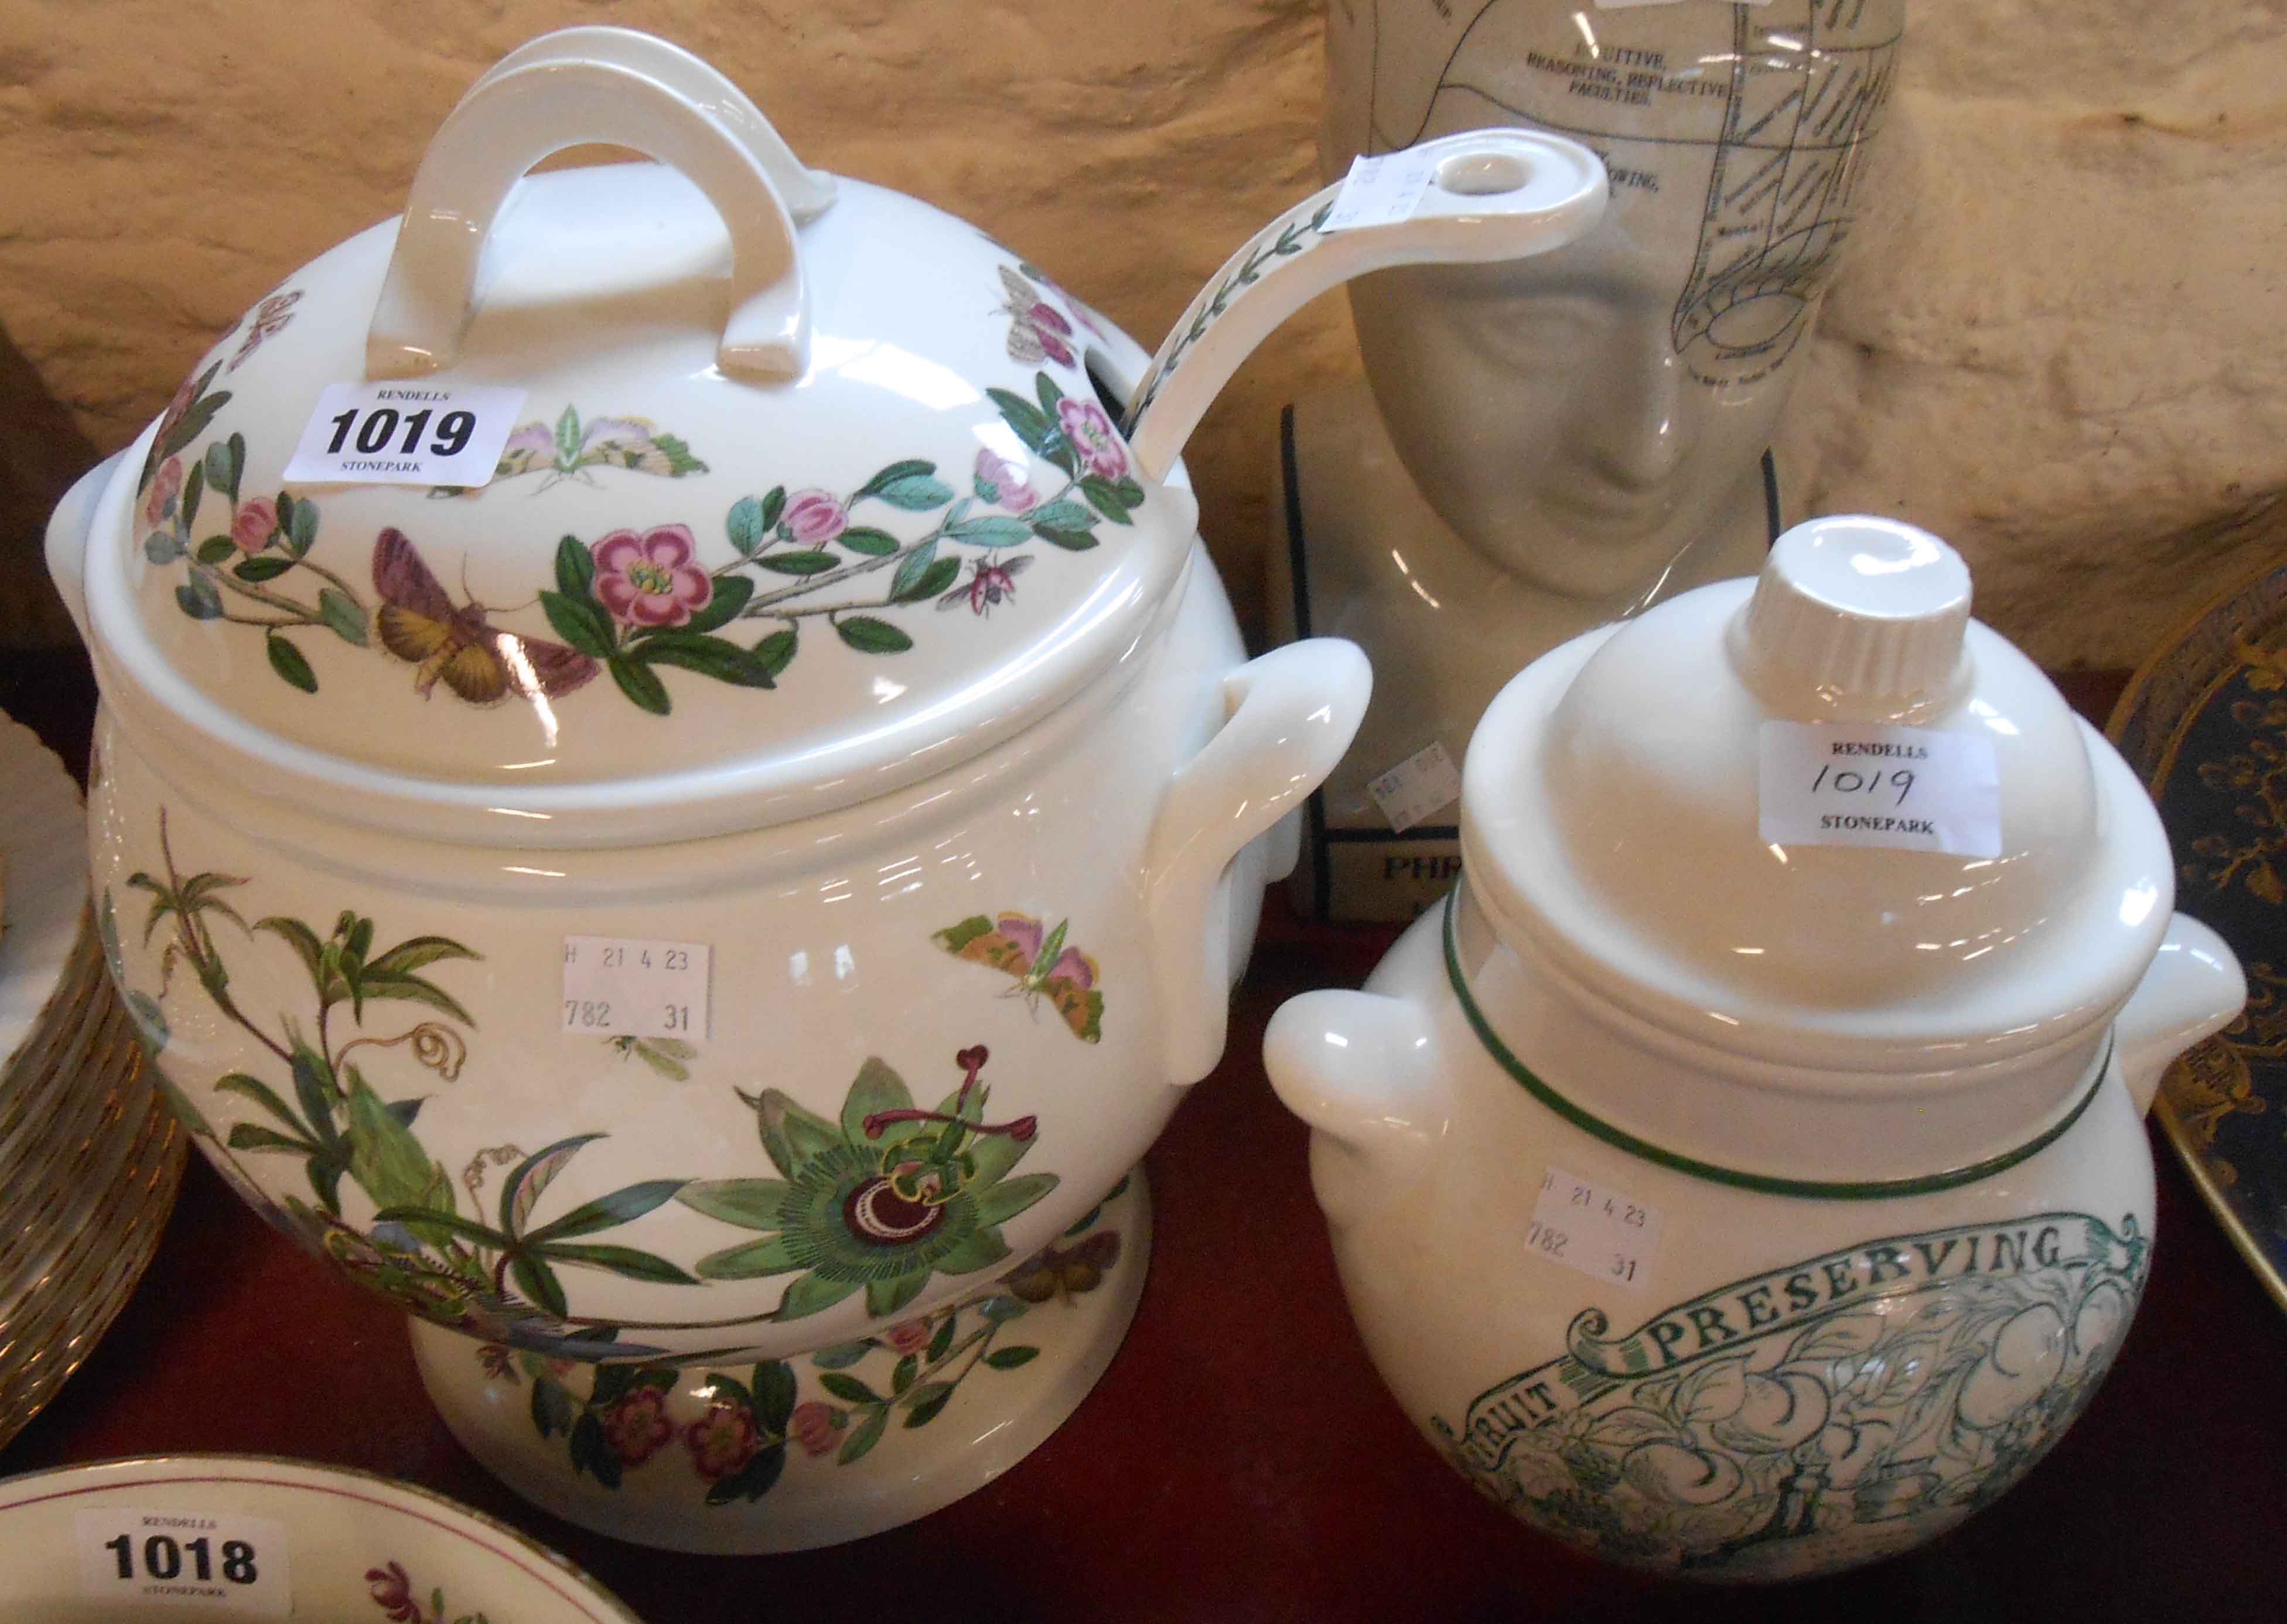 A large Portmeirion lidded soup tureen and ladle decorated in the Botanic Garden pattern - sold with